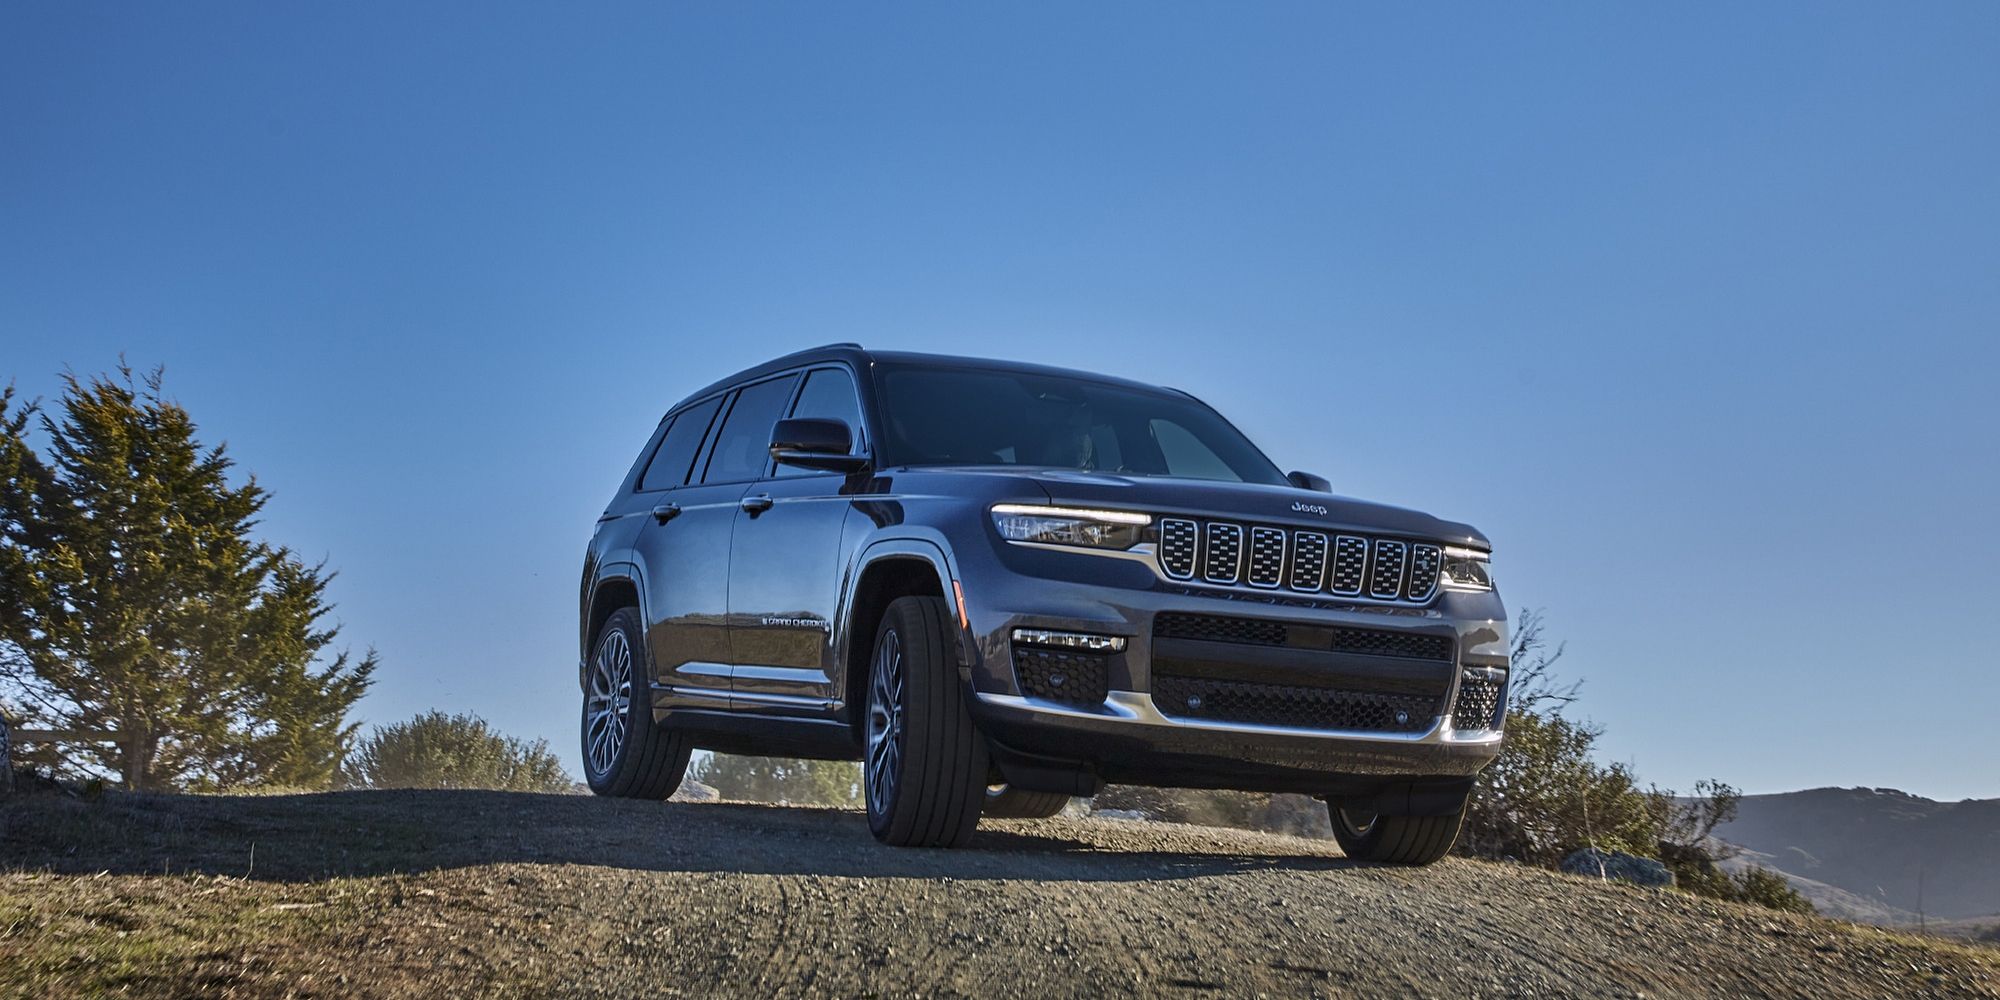 The new Grand Cherokee offroading 